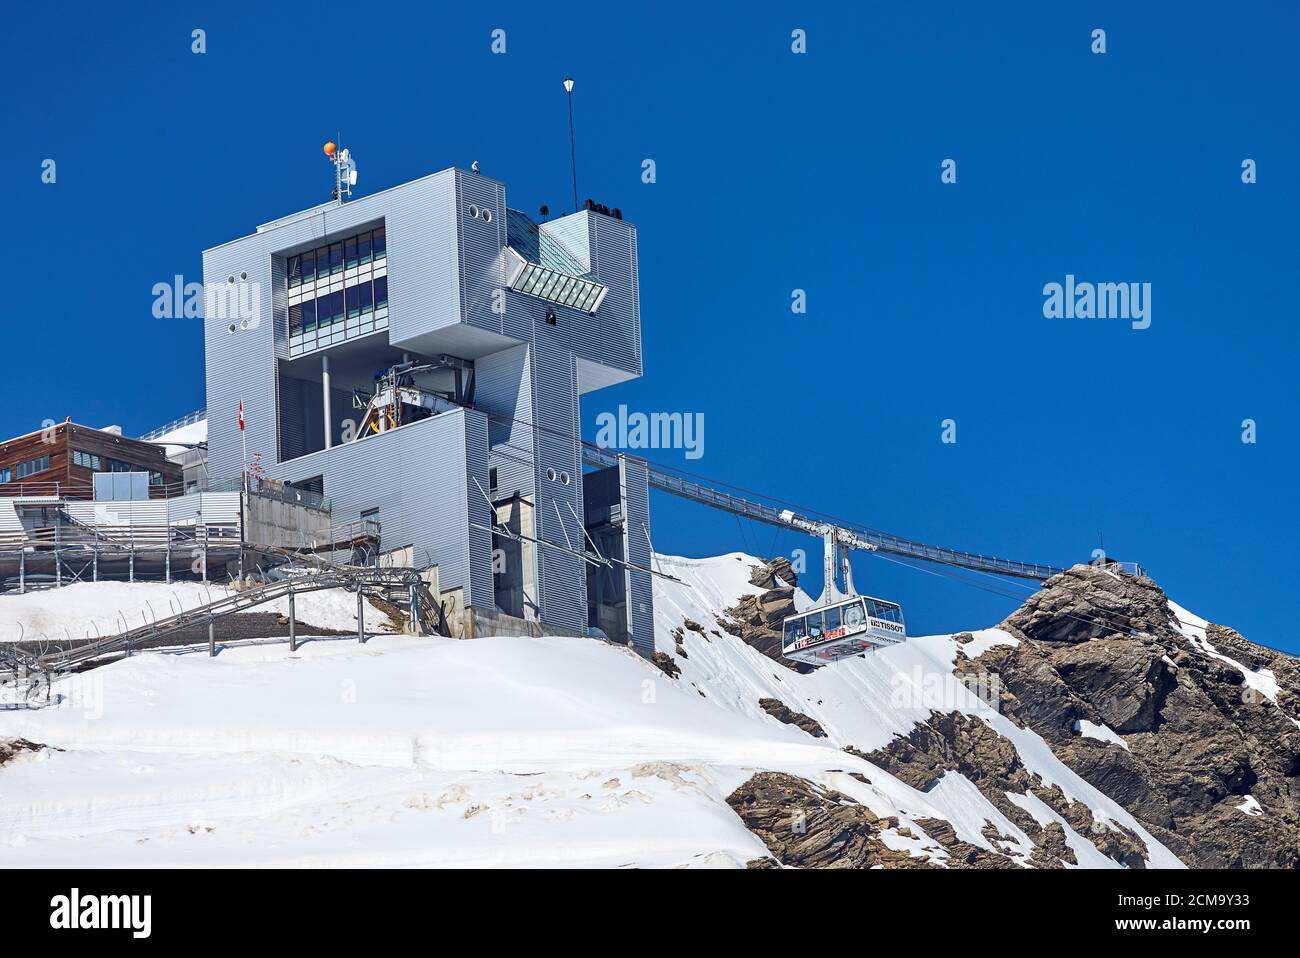 A cable car of the Glacier 3000 resort is pictured at the upper station,  designed by